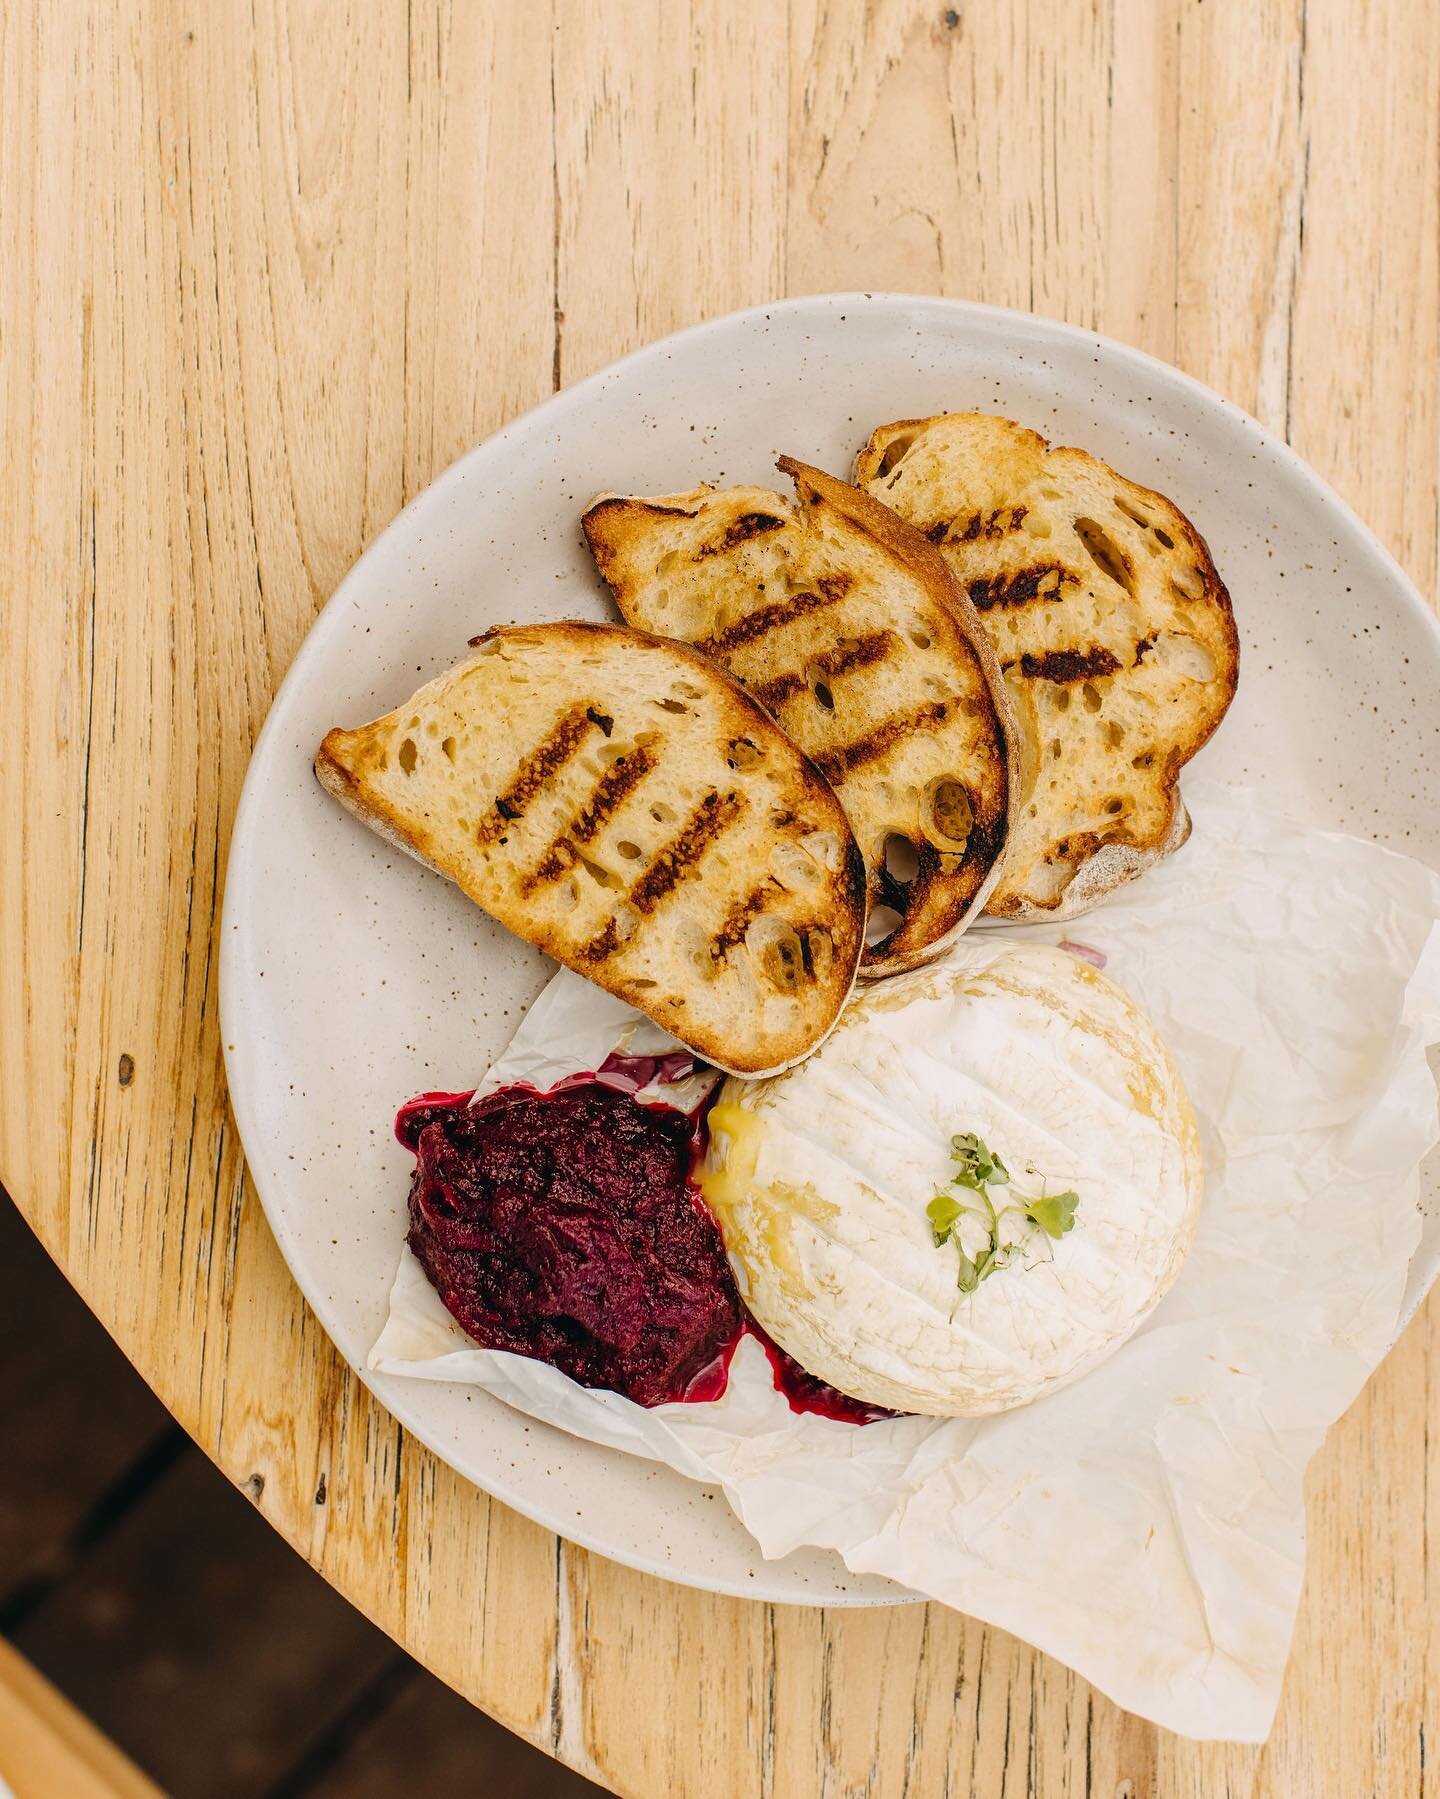 Baked Margaret River Brie, beetroot + onion relish, Chargrilled Yallingup Woodfired Sourdough. The perfect lazy Sunday afternoon snack 🫶🏼